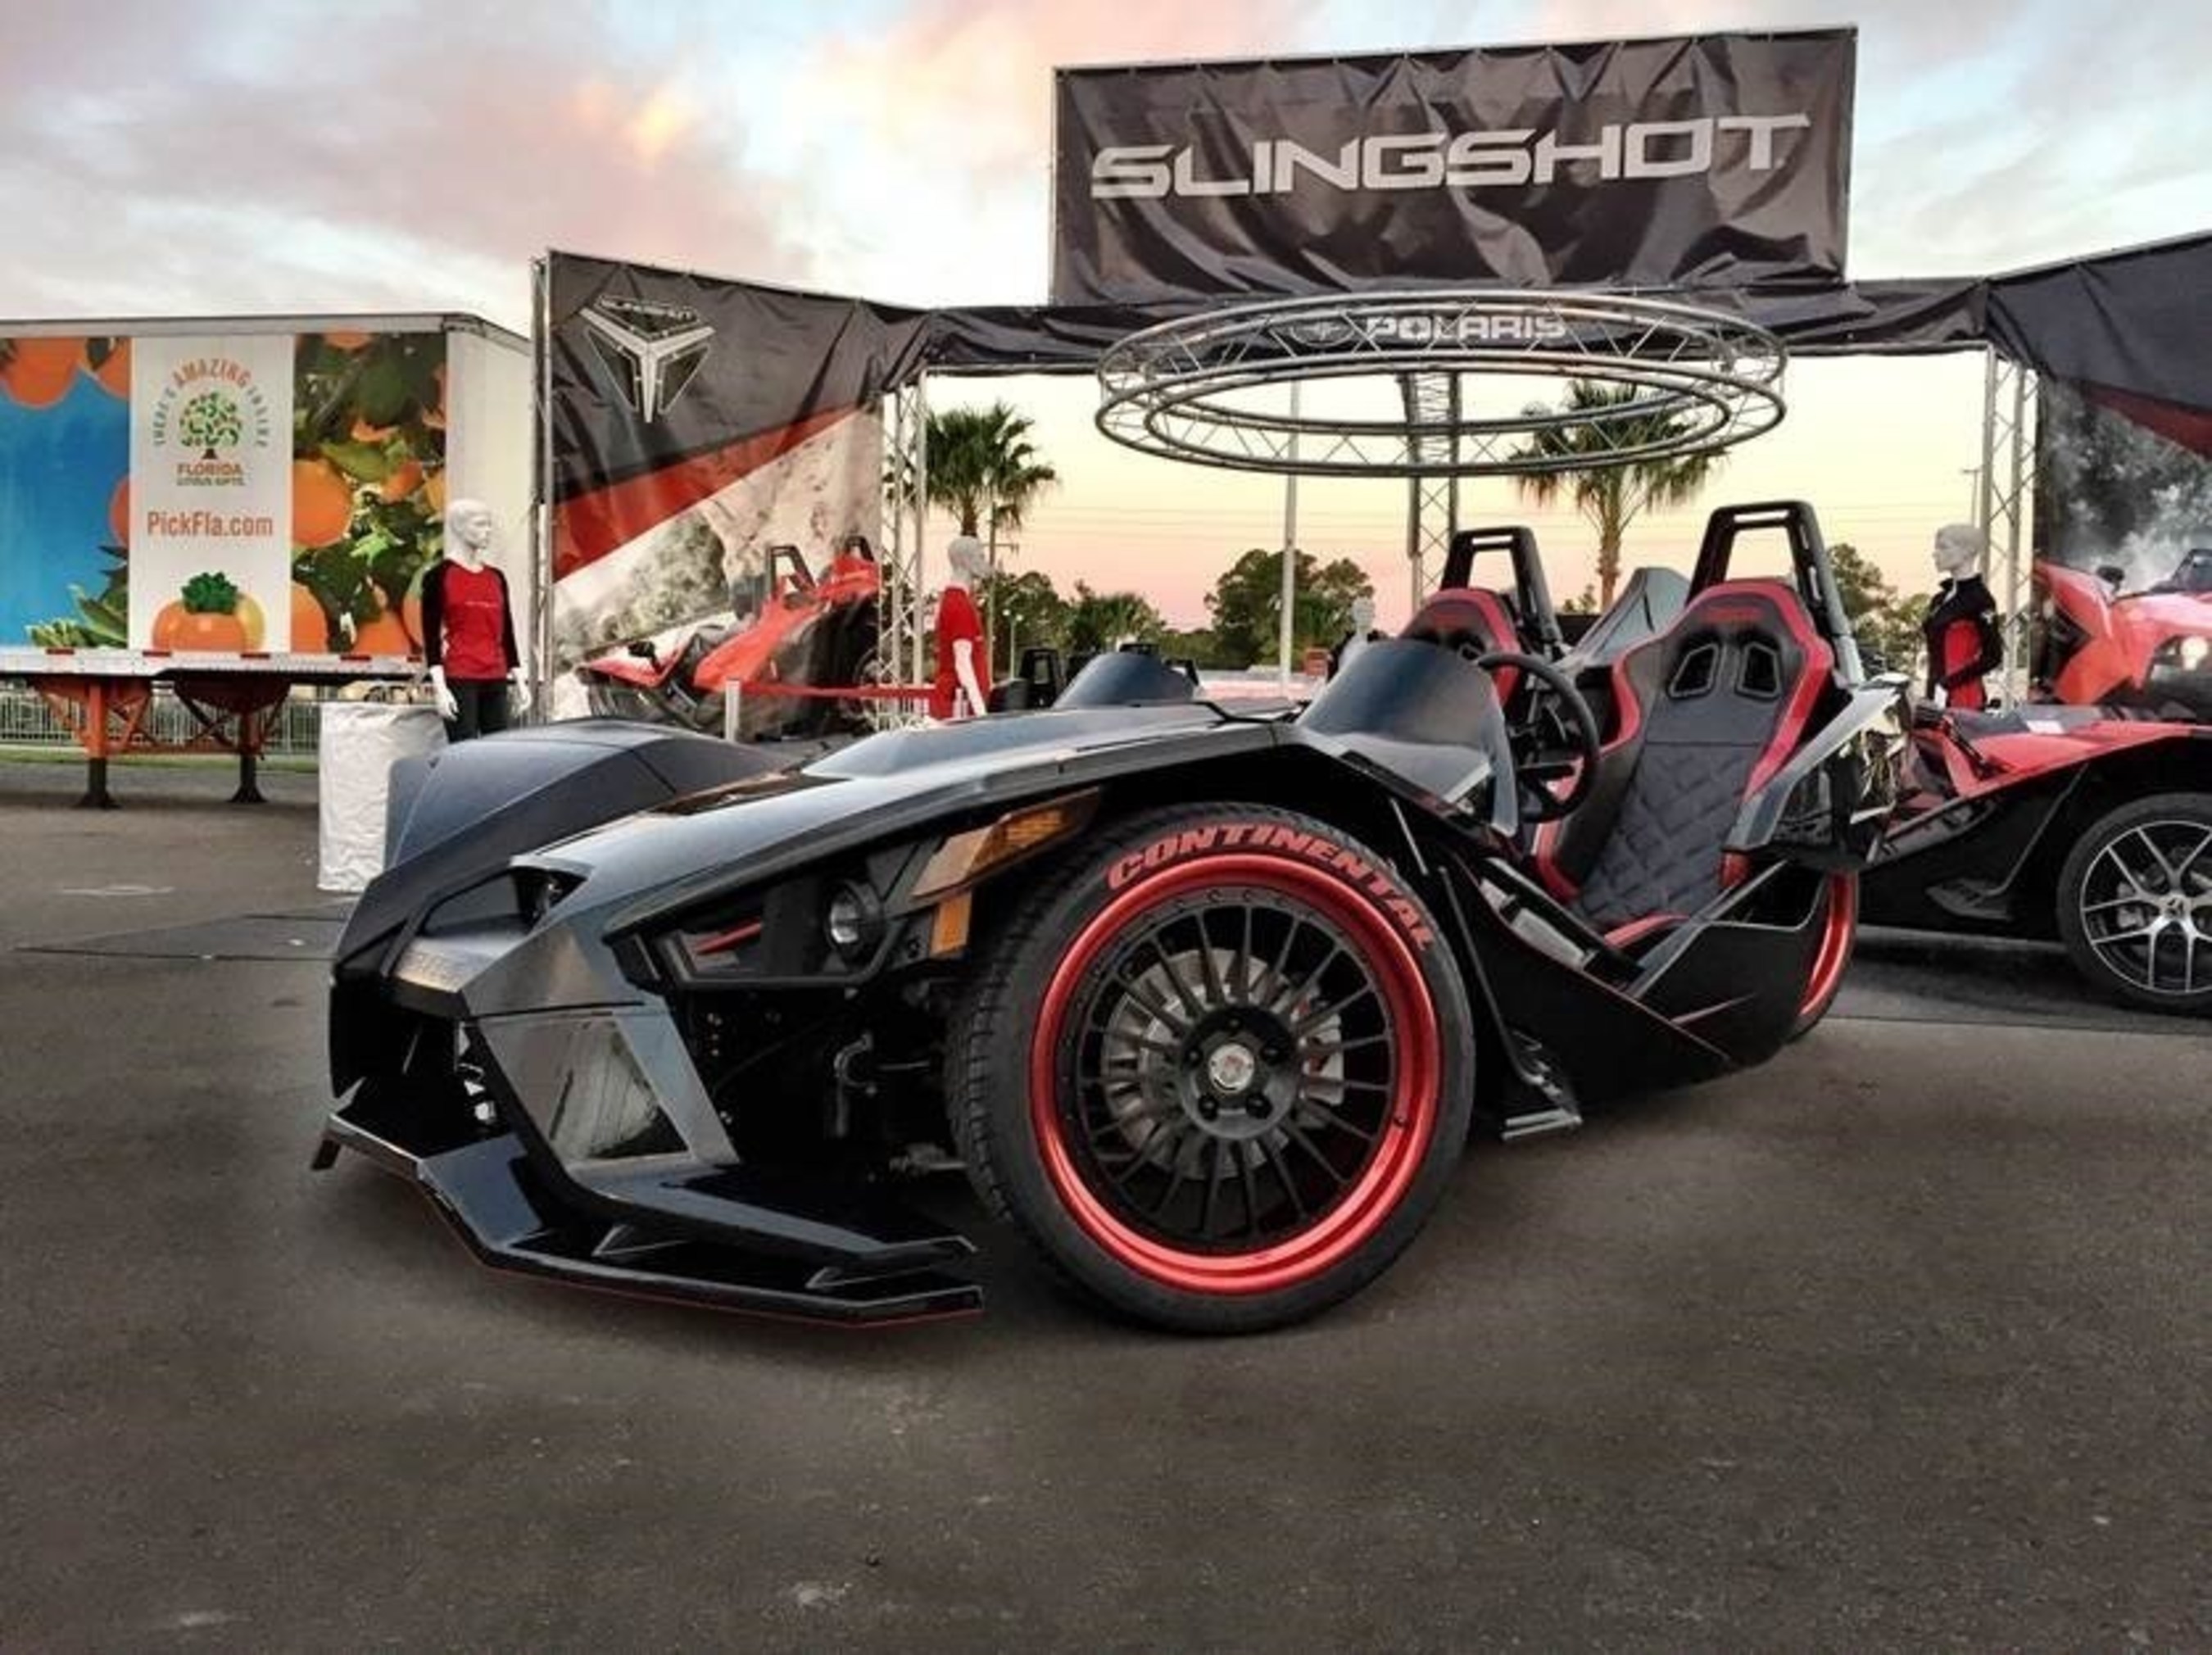 The Polaris Slingshot that will be driven in the upcoming Slingshot X video series, on display at Biketoberfest in Daytona Beach, Fla